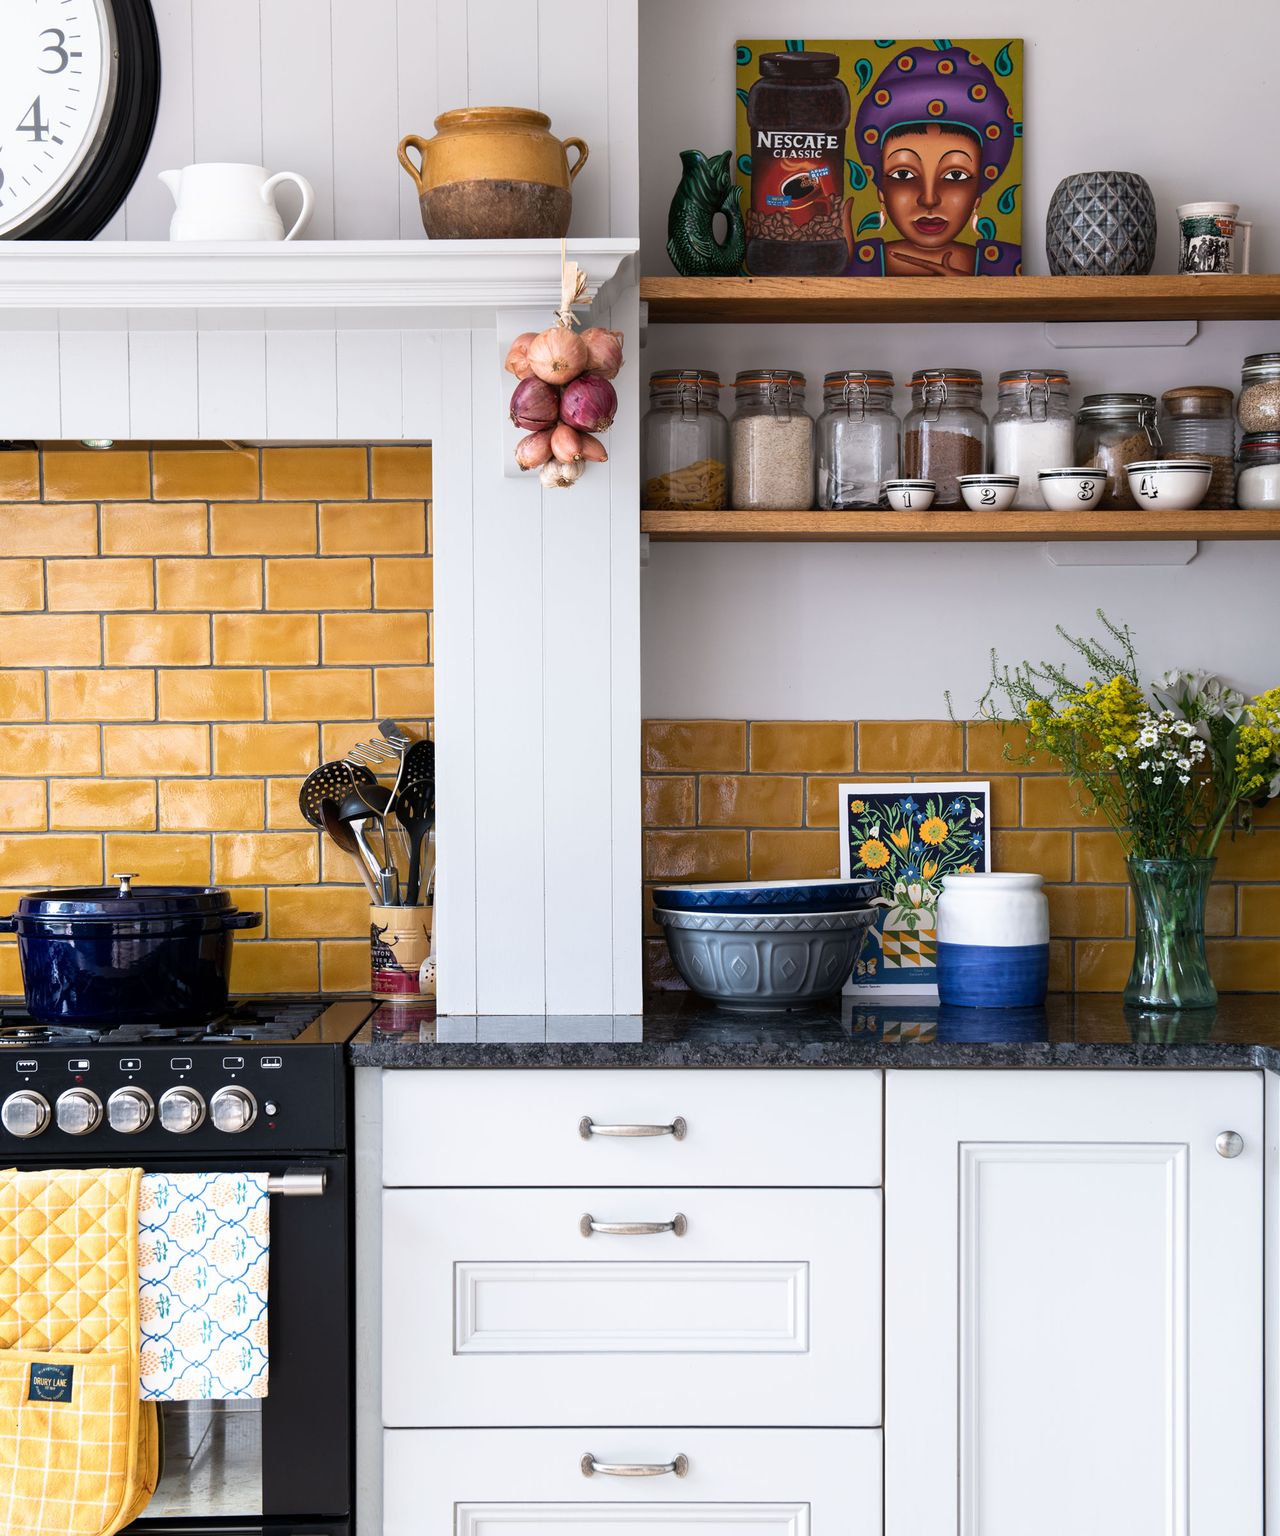 12 yellow kitchen ideas to brighten up your cooking space | Real Homes